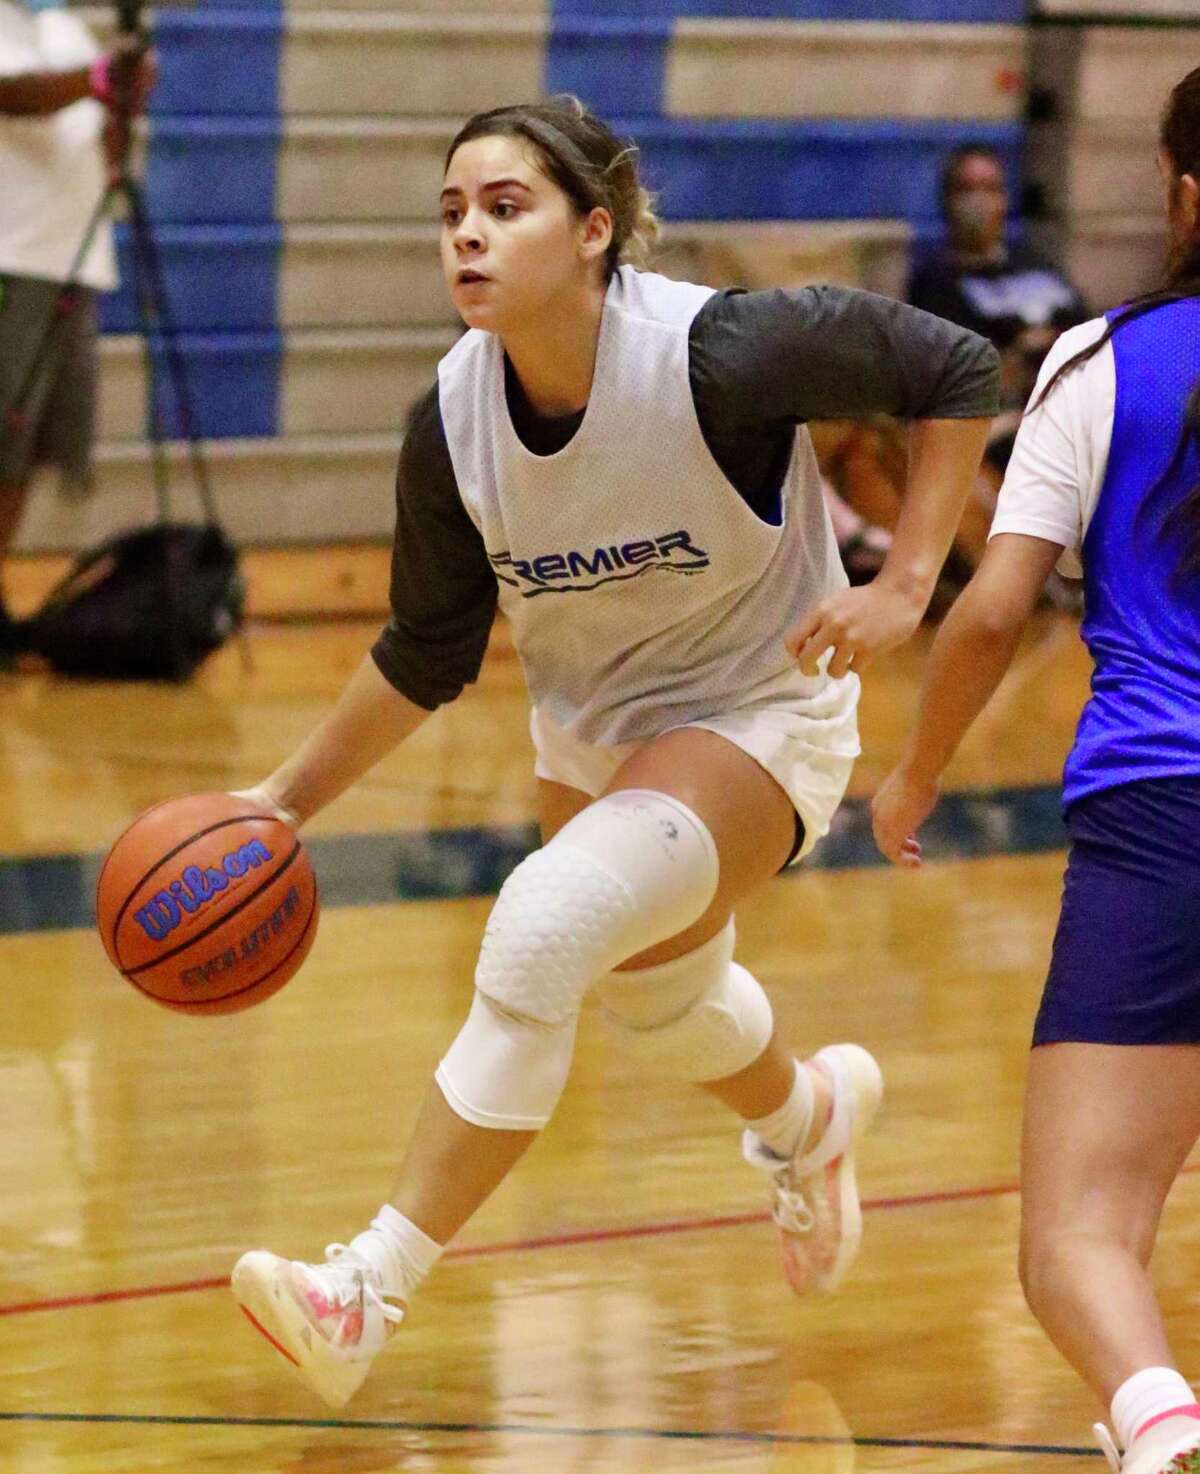 Evelyn Quiroz averaged 13 points, 5 rebounds, 2.5 assists and 2.6 steals per game last season.